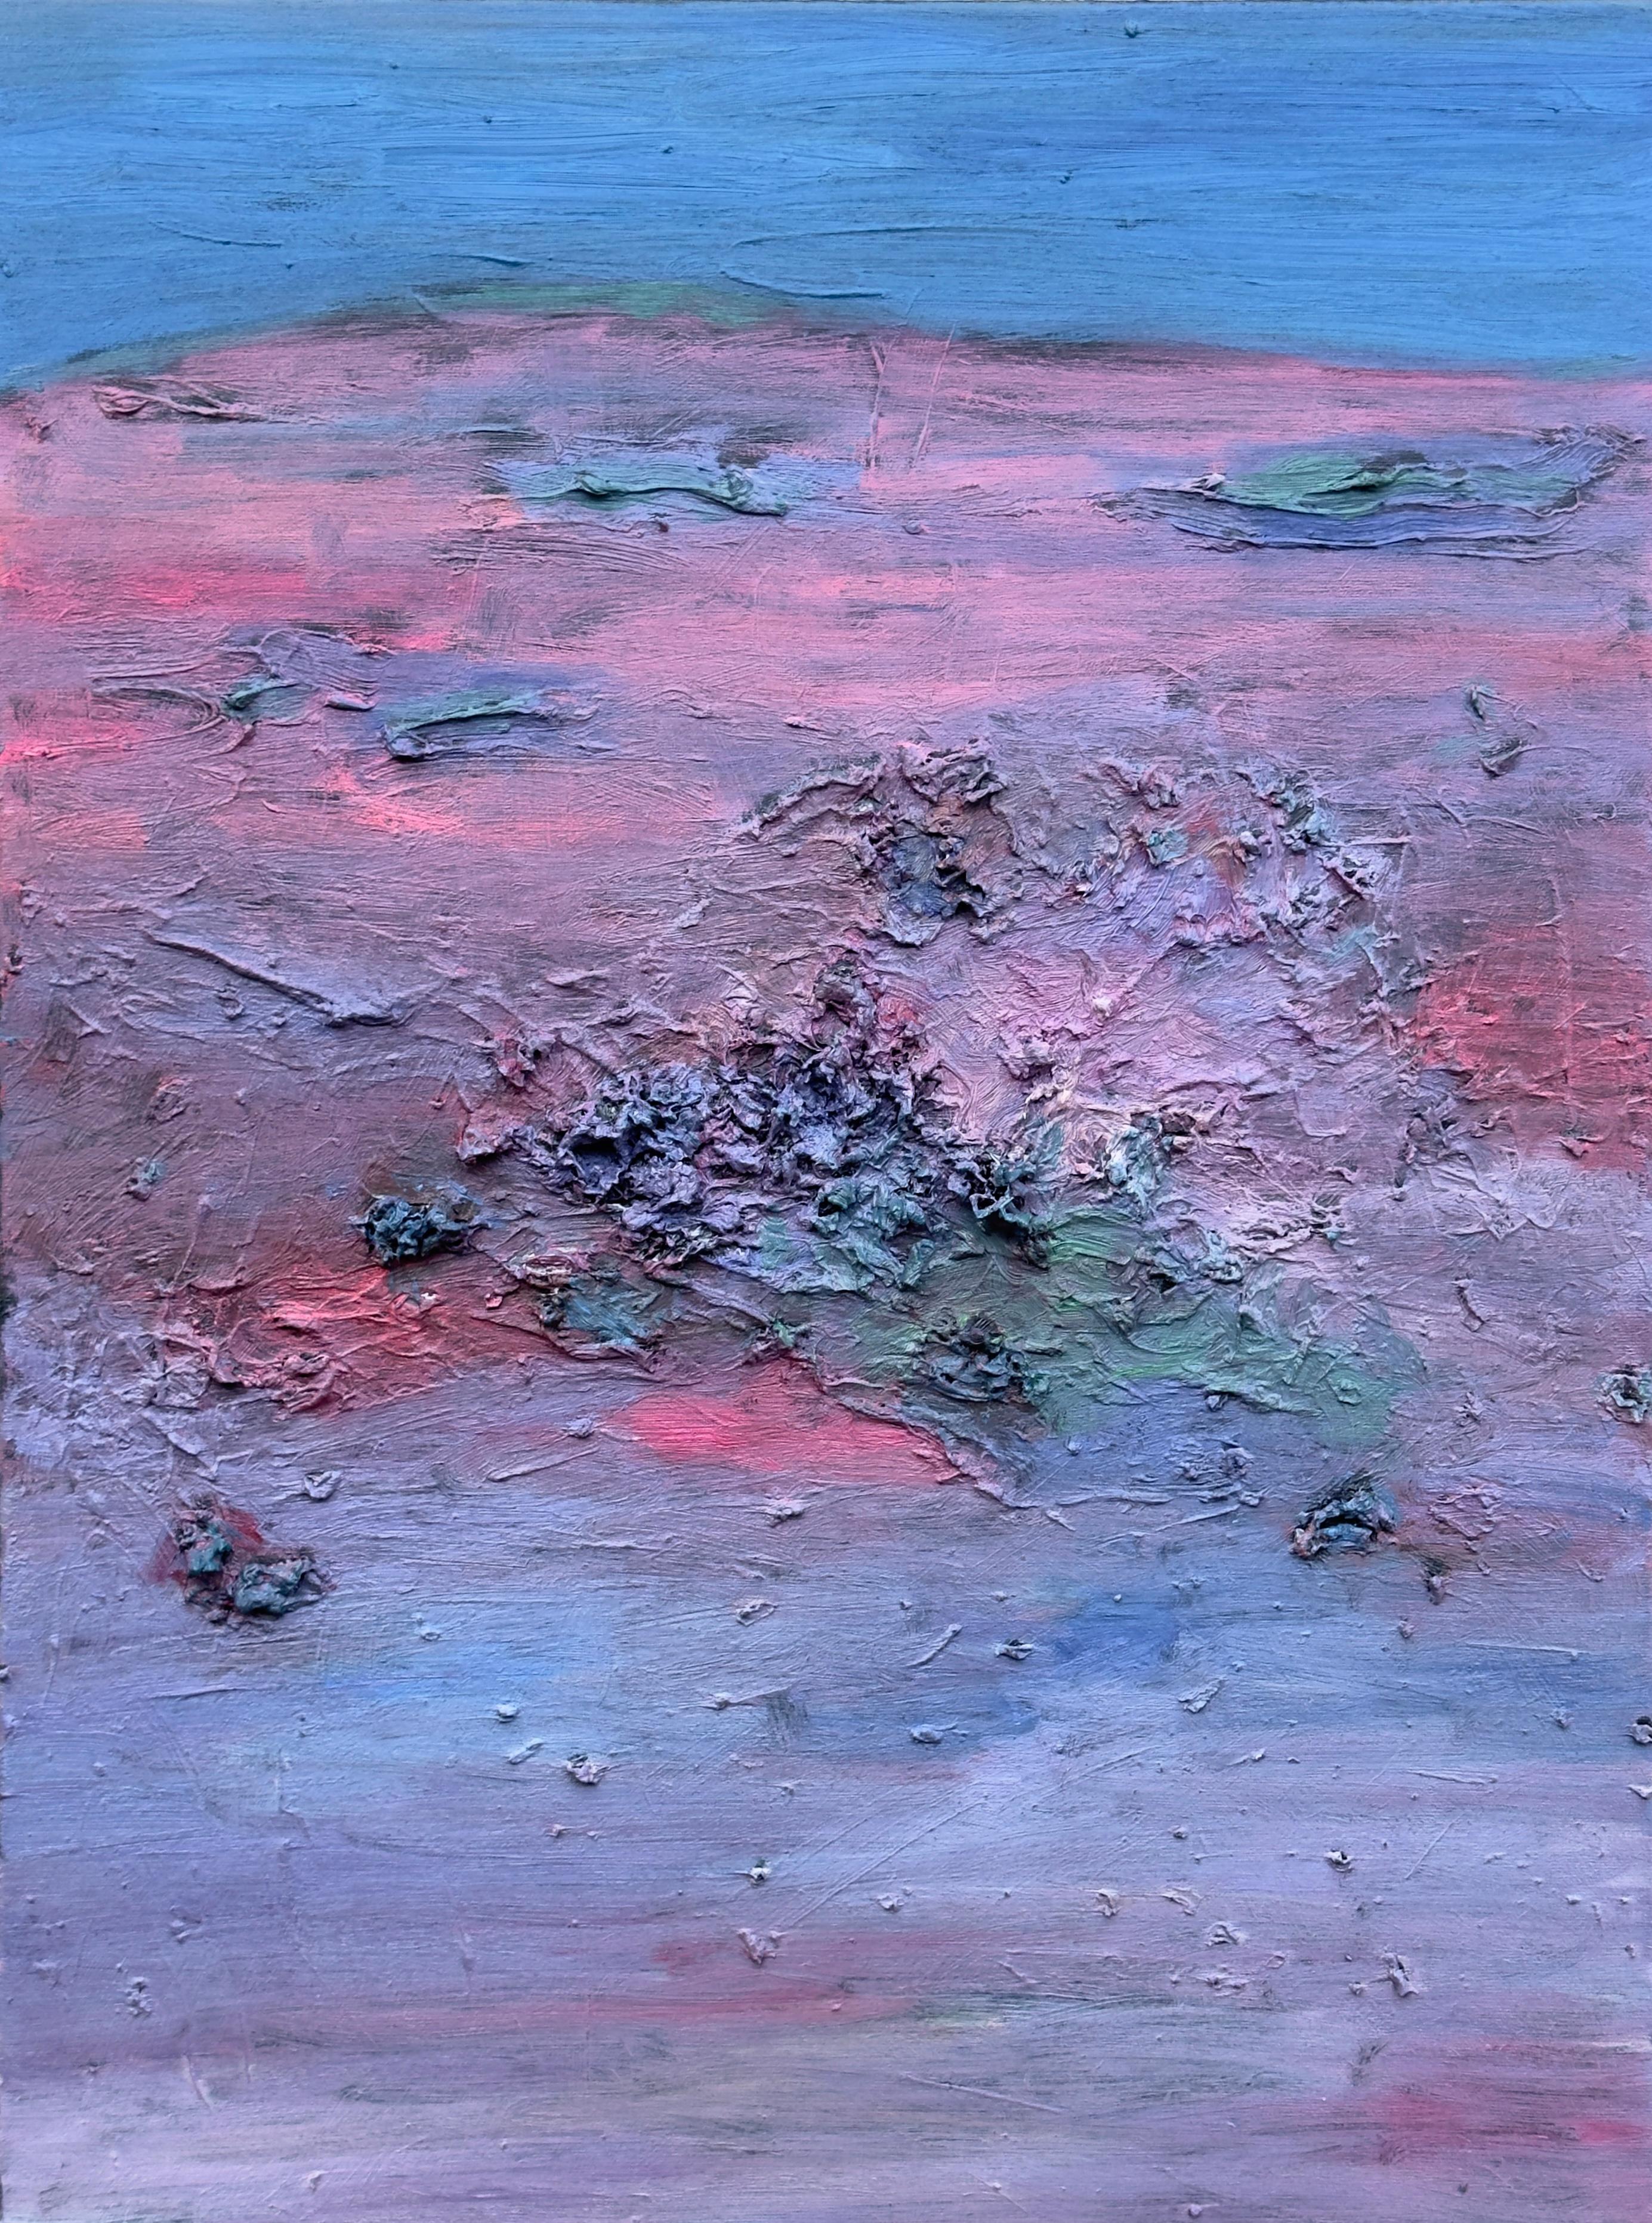 Body in the Field #1 - Abstract painting, landscape, blue, pink